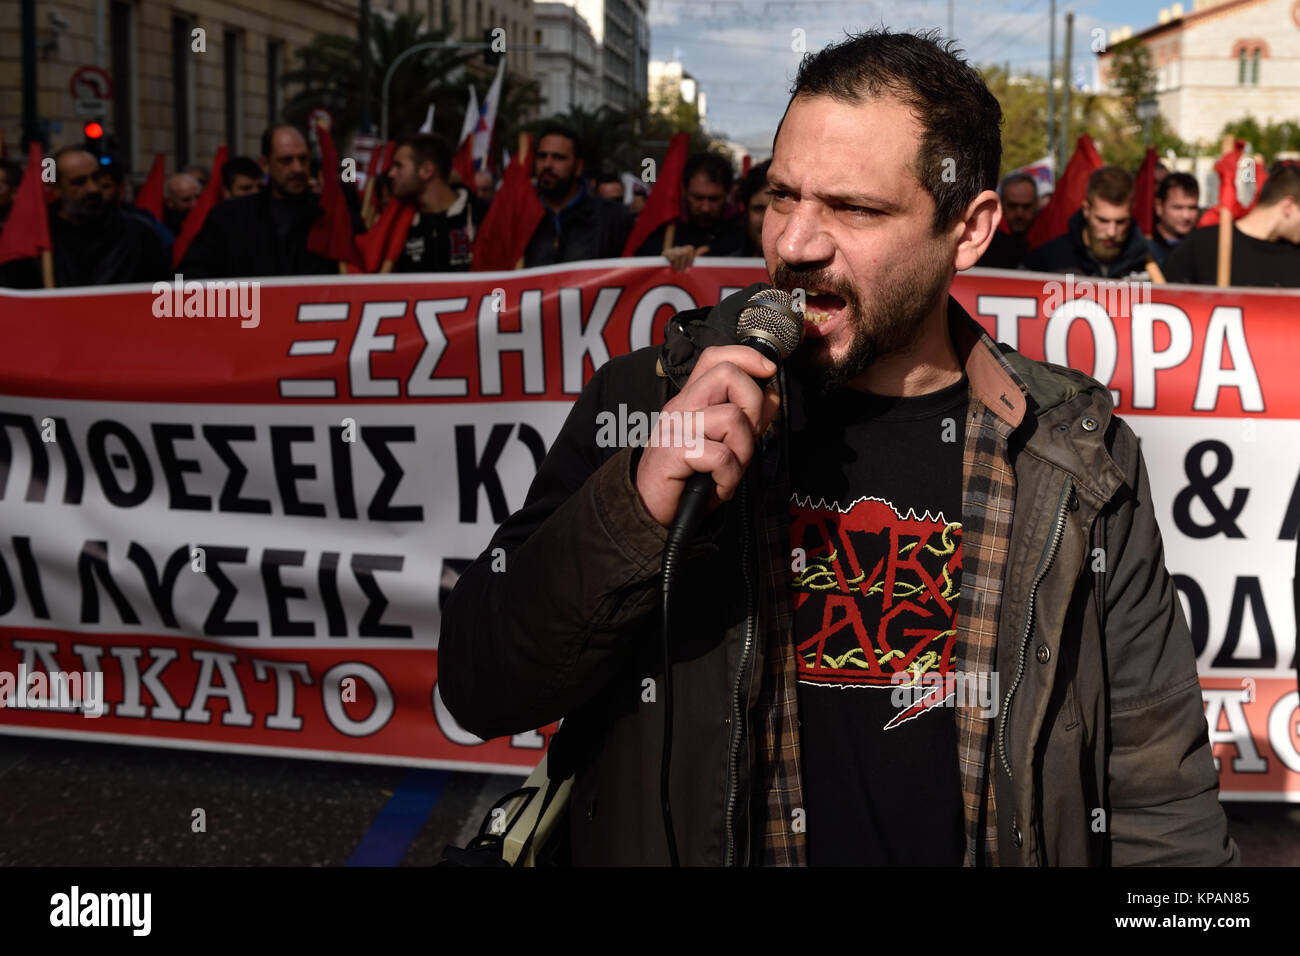 Athens, Greece, 14th December, 2017. Greek Communists march during the 24-hour general strike against the government's austerity policy in Athens, Greece. Credit: Nicolas Koutsokostas/Alamy Live News Stock Photo